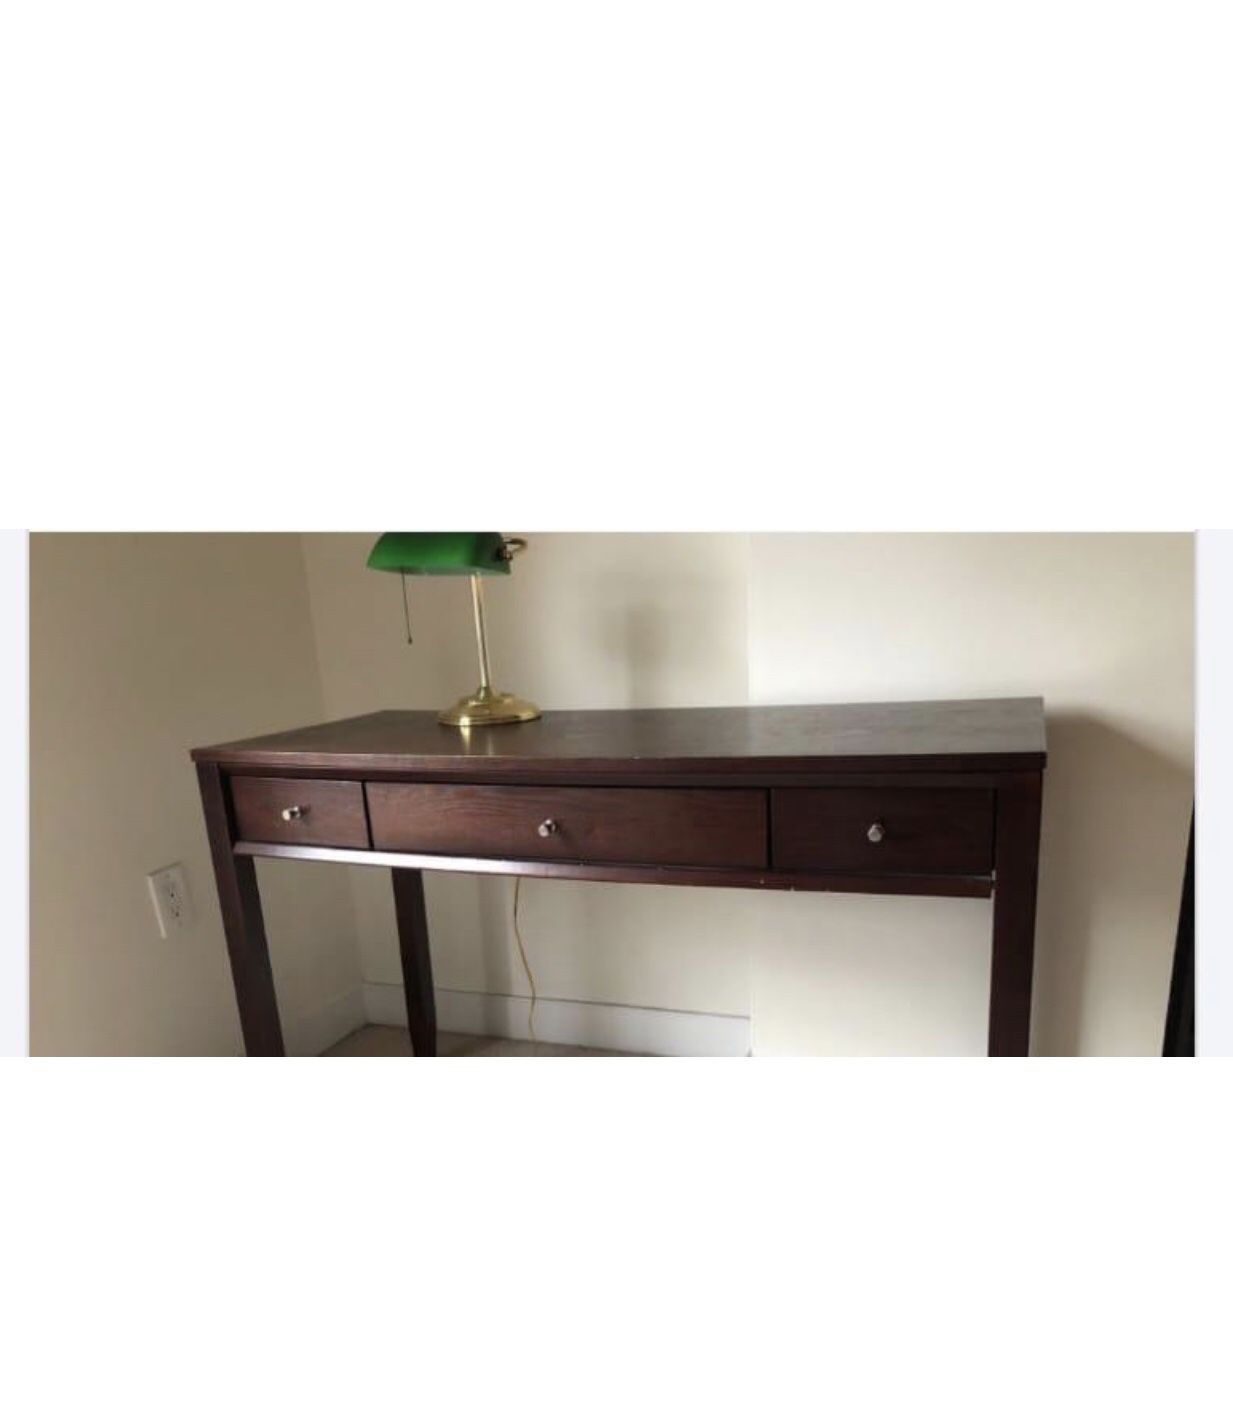 Desk and filing cabinet for $85